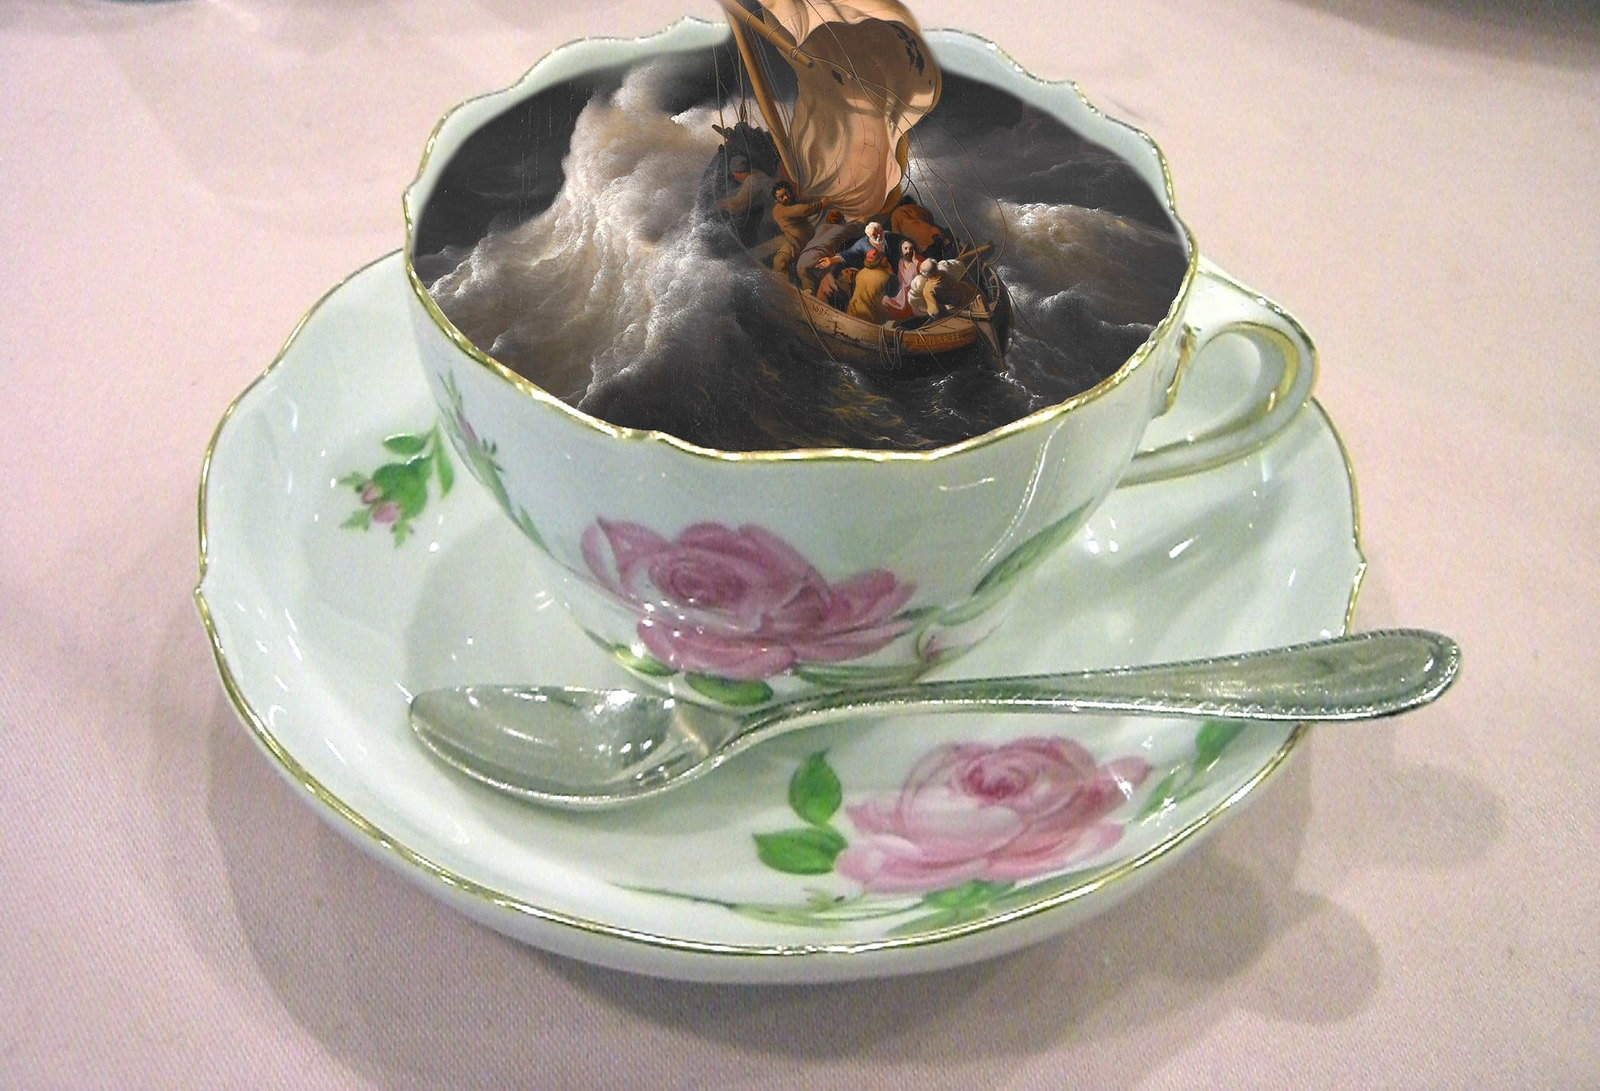 Storm in a teacup. Derivative of work credited to Miya